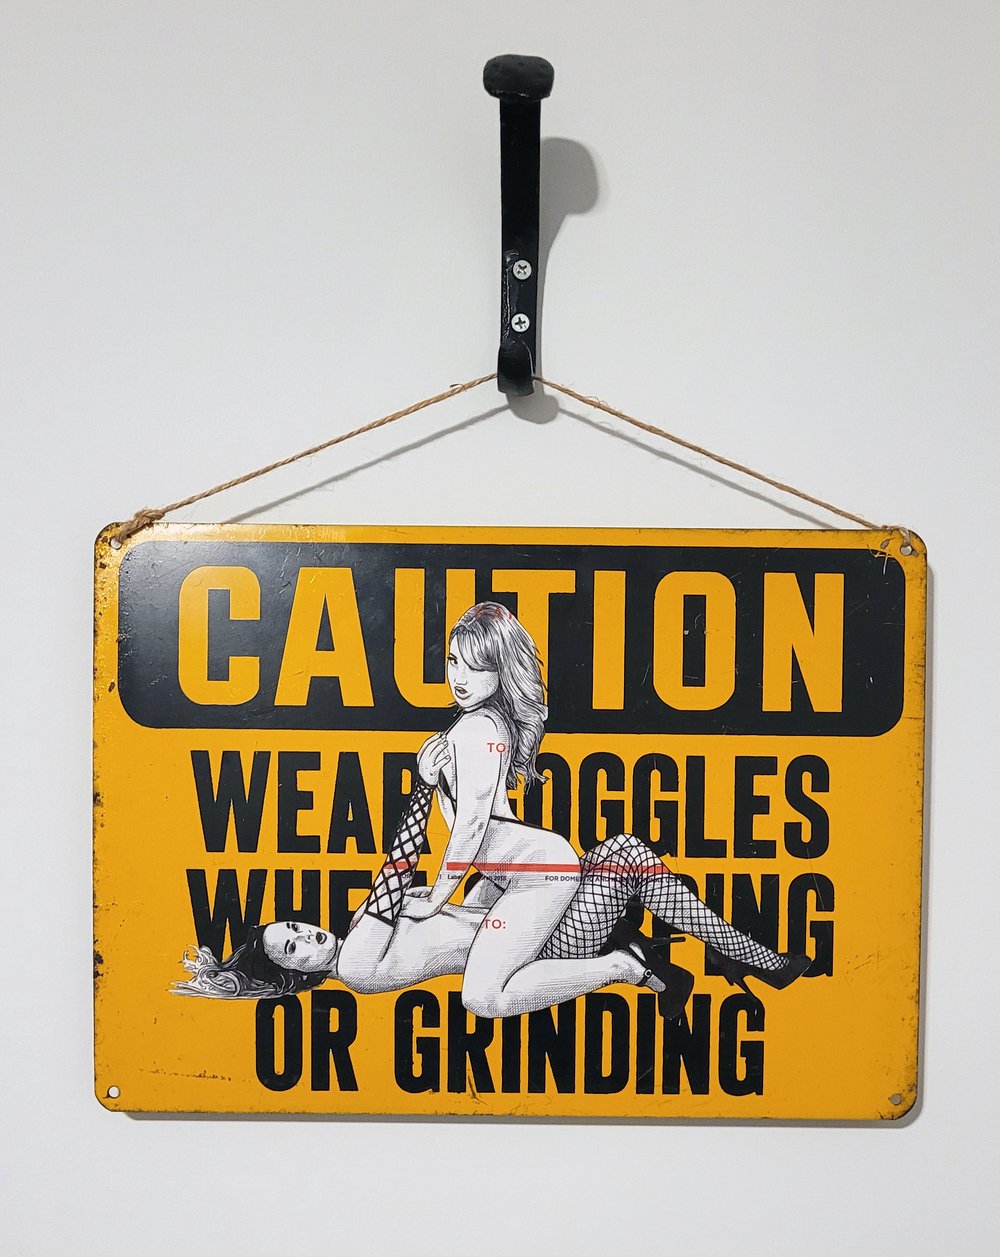 "CAUTION: WEAR GOGGLES WHEN CHIPPING OR GRINDING"